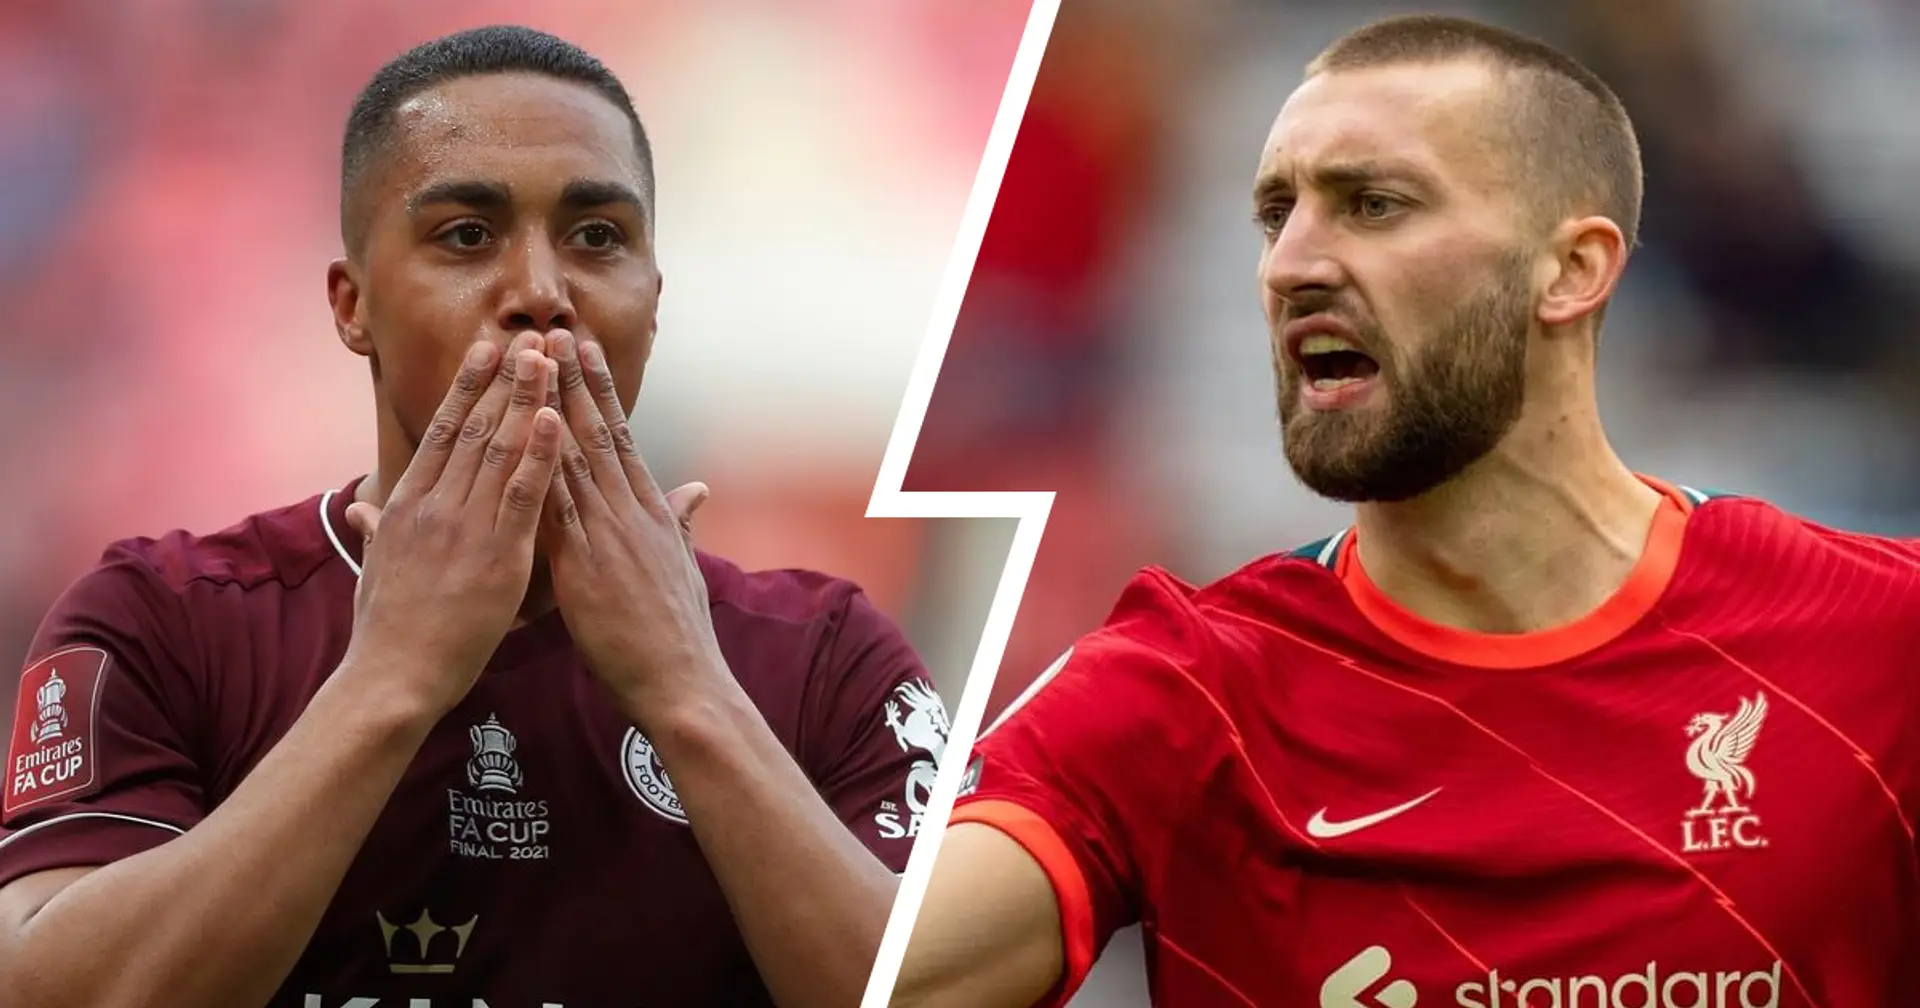 Tielemans links, Phillips exit rumours: latest Liverpool transfer round-up with probability ratings